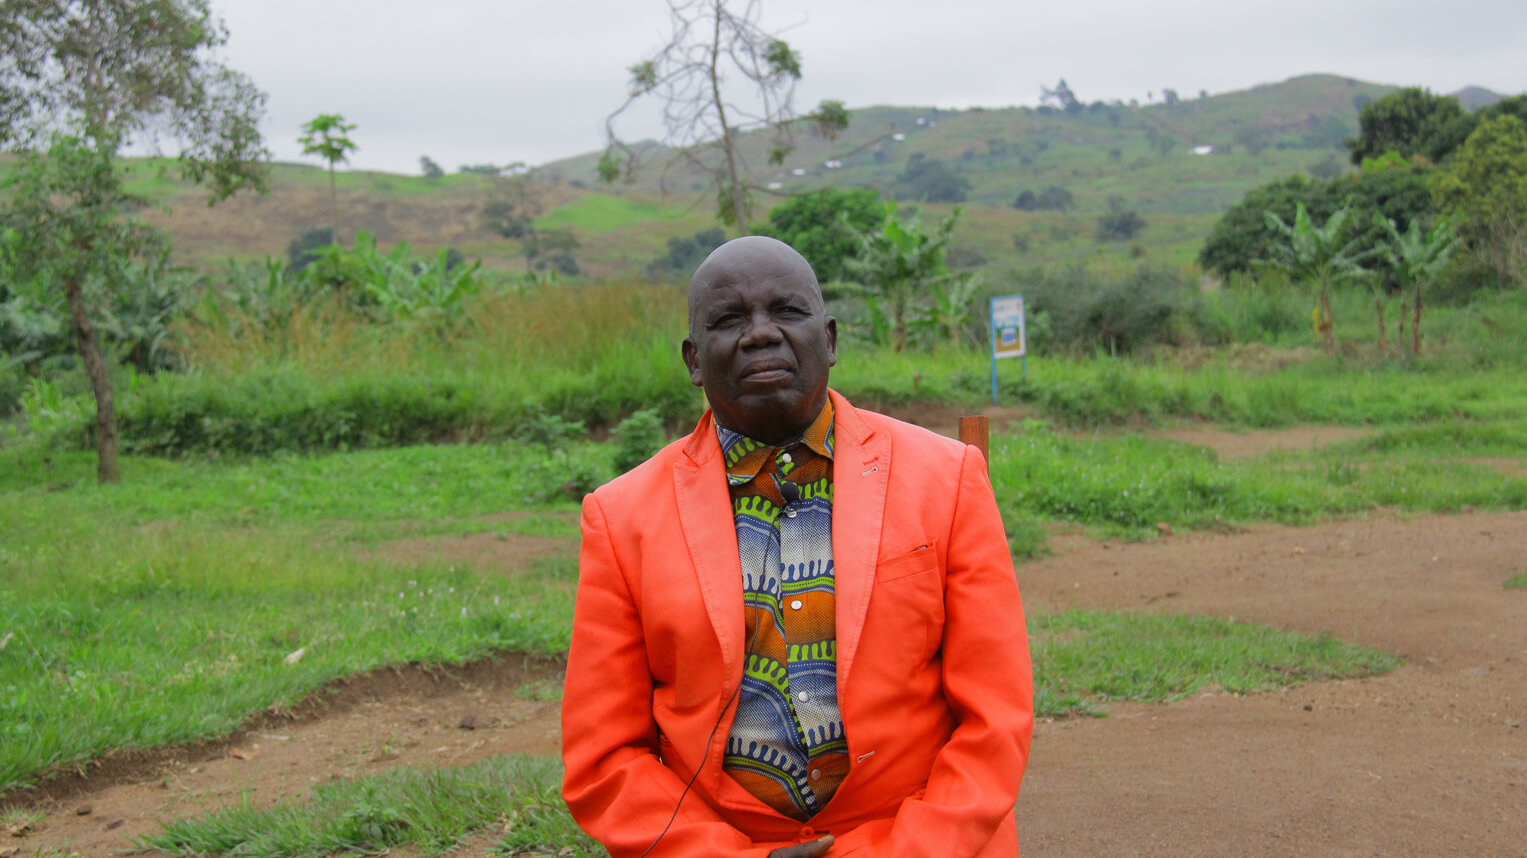 Trophine, a long-time elder at the church in Sorodo, is celebrating the answer to a lifelong prayer.